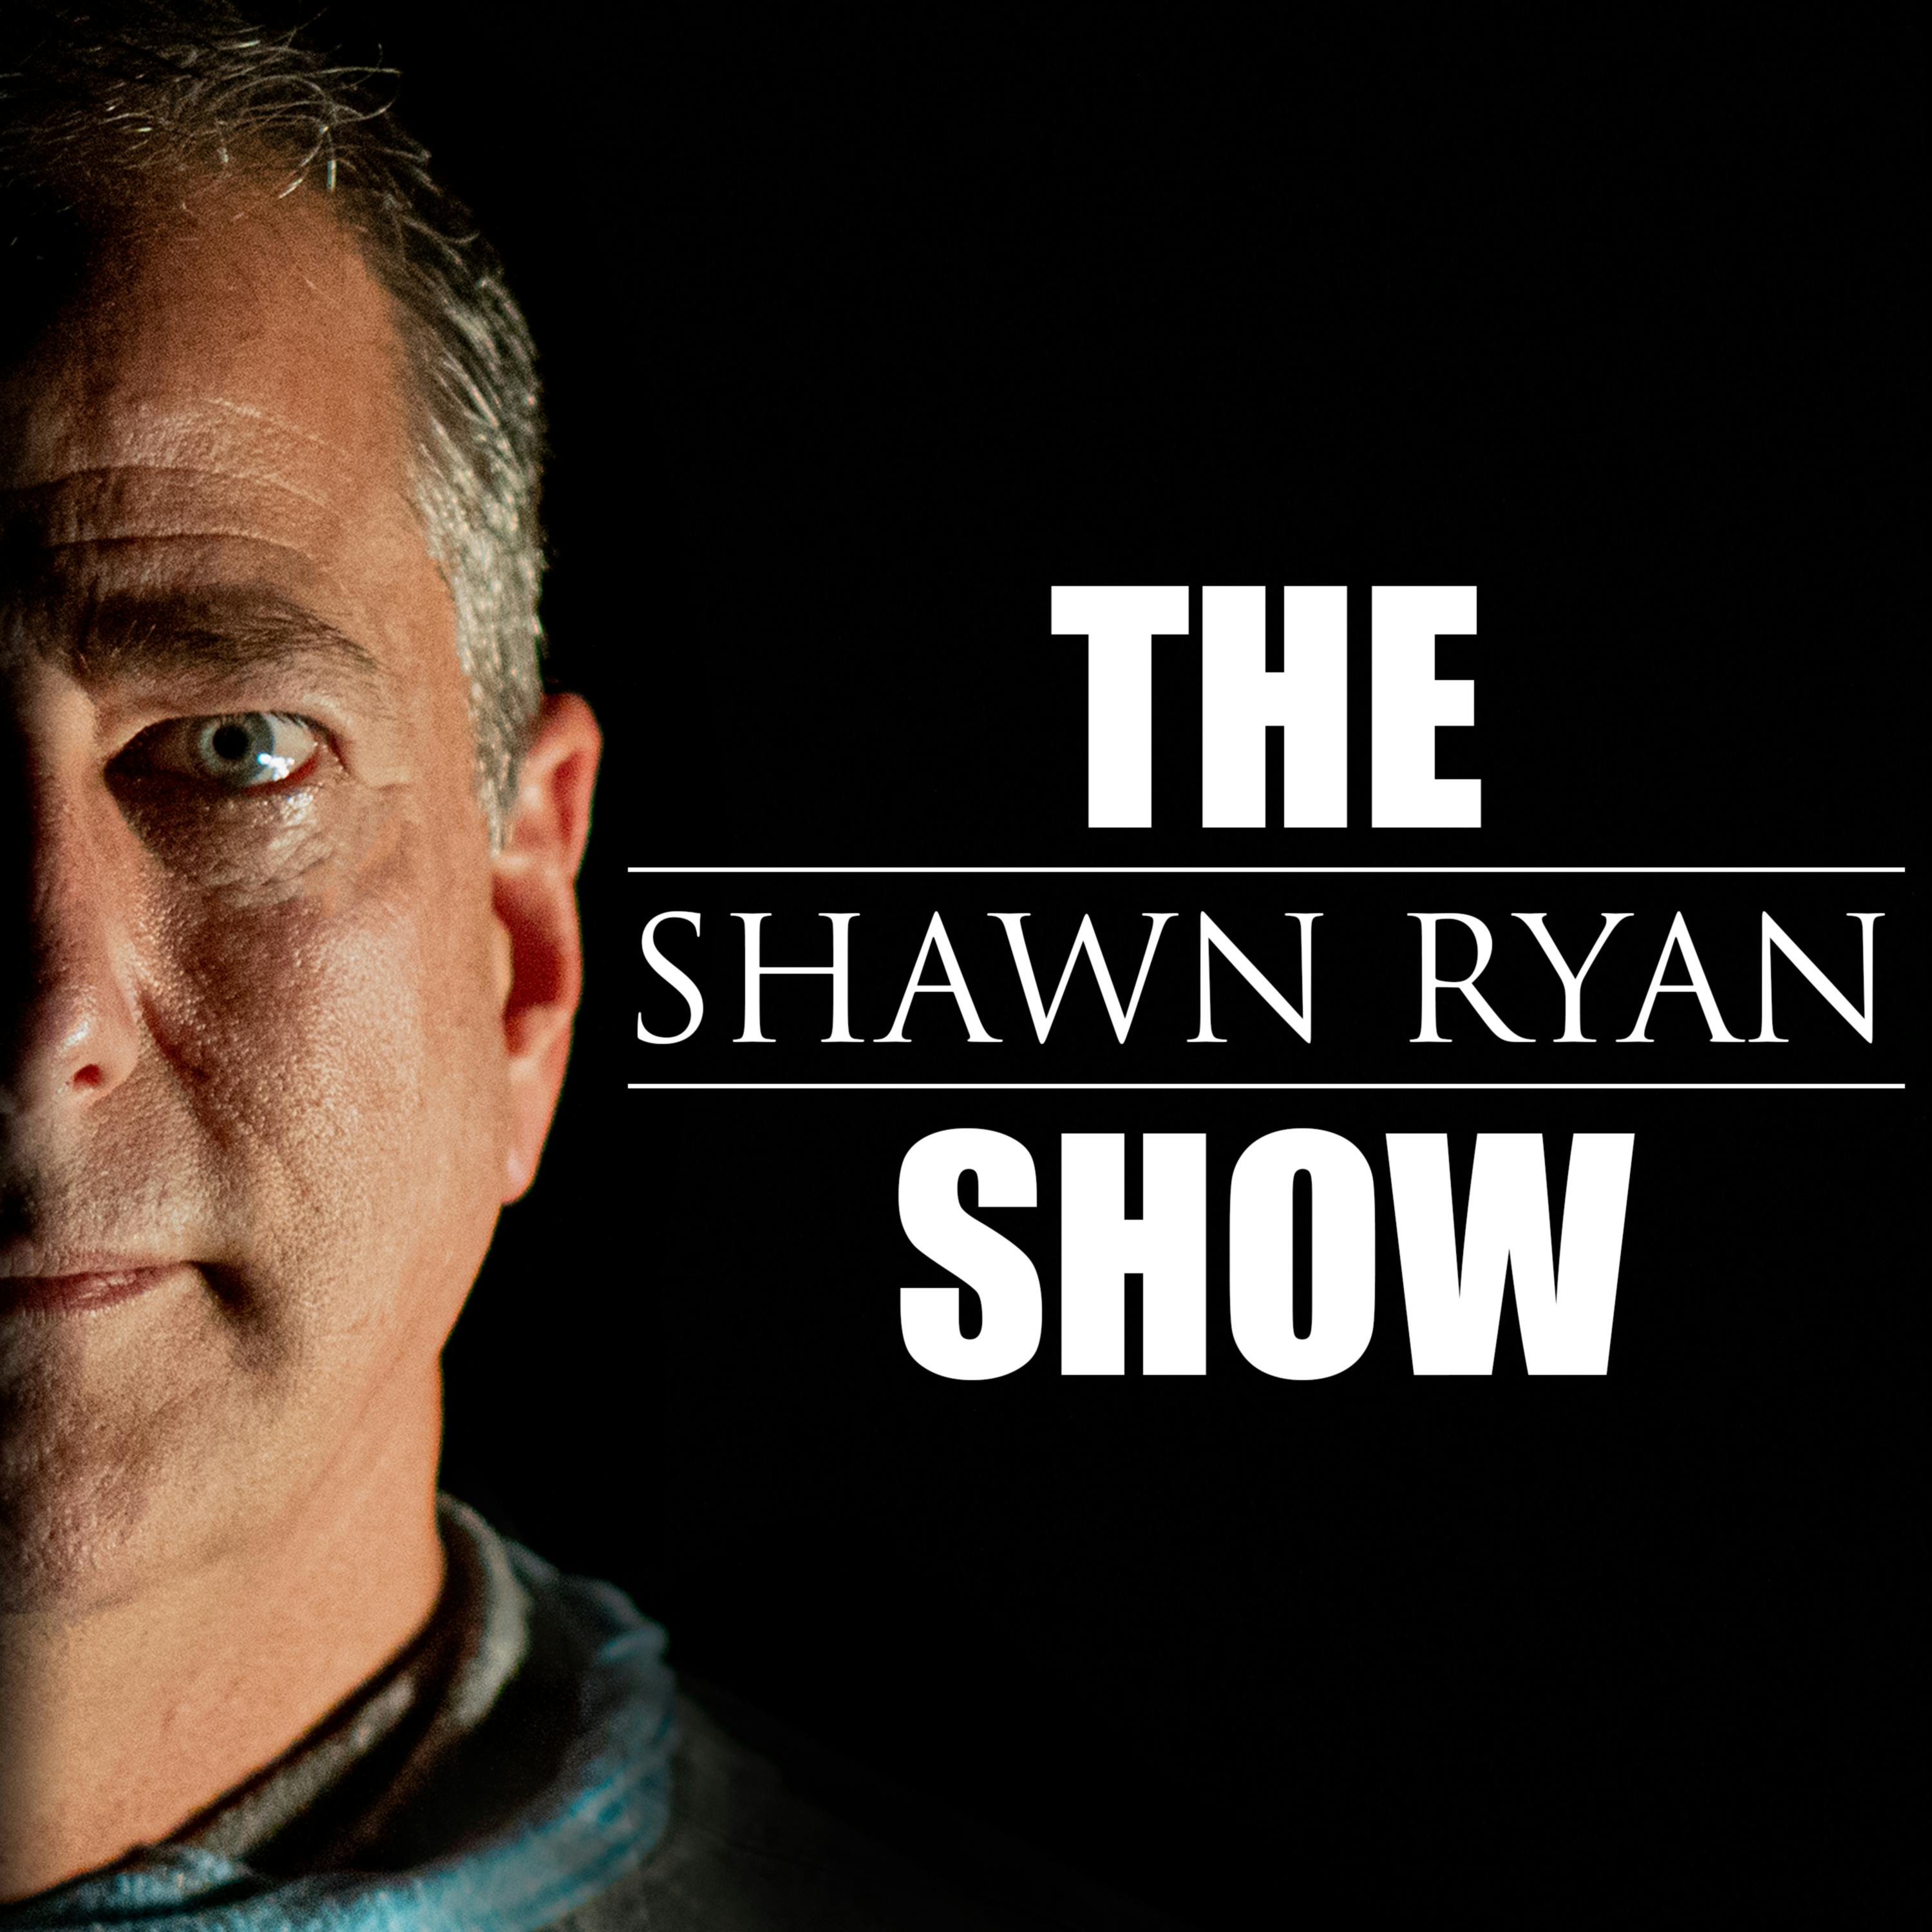 #16 Chief Hallgrimson - Guilty of Assault After Rescuing Baby from Murderer by Shawn Ryan | Cumulus Podcast Network